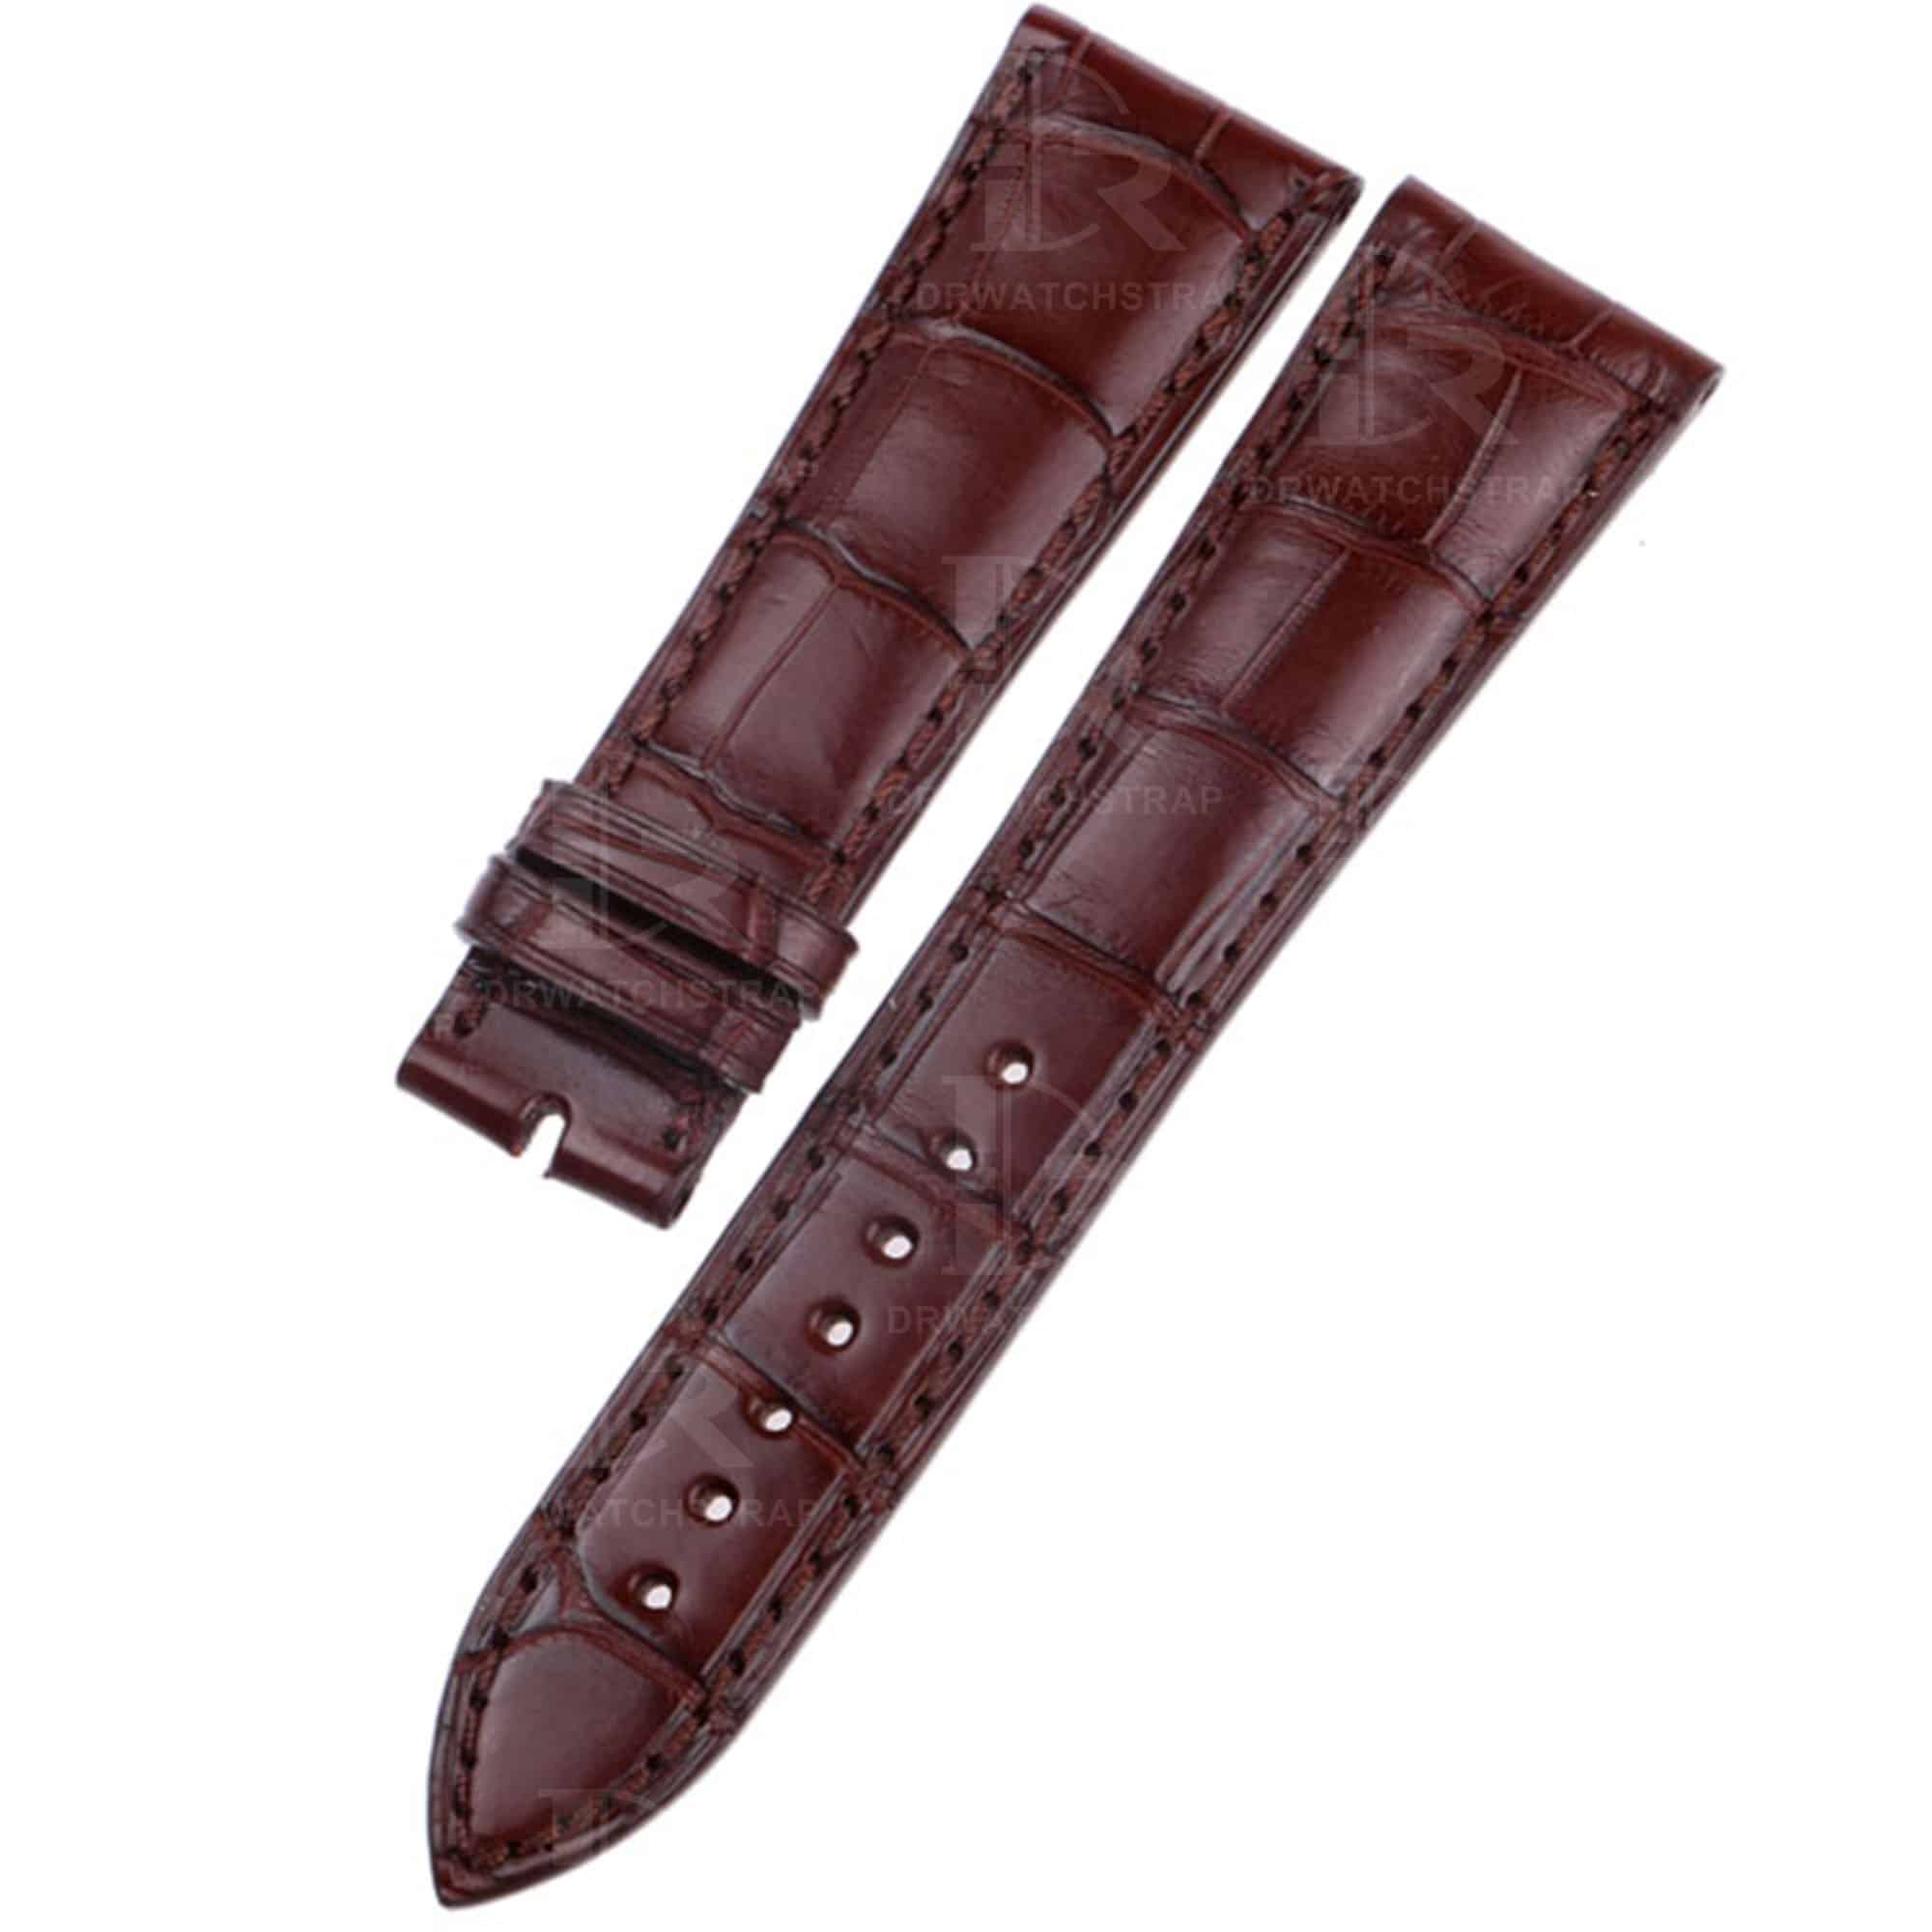 Custom best quality American Alligator crocodile handmade brown replacement Bulgari leather watch strap and watch band replacement for Bvlgari Bvlgari / Assioma luxury mens women's watch - Buy the premium belly-scale straps and watchband online from dr watchstrap